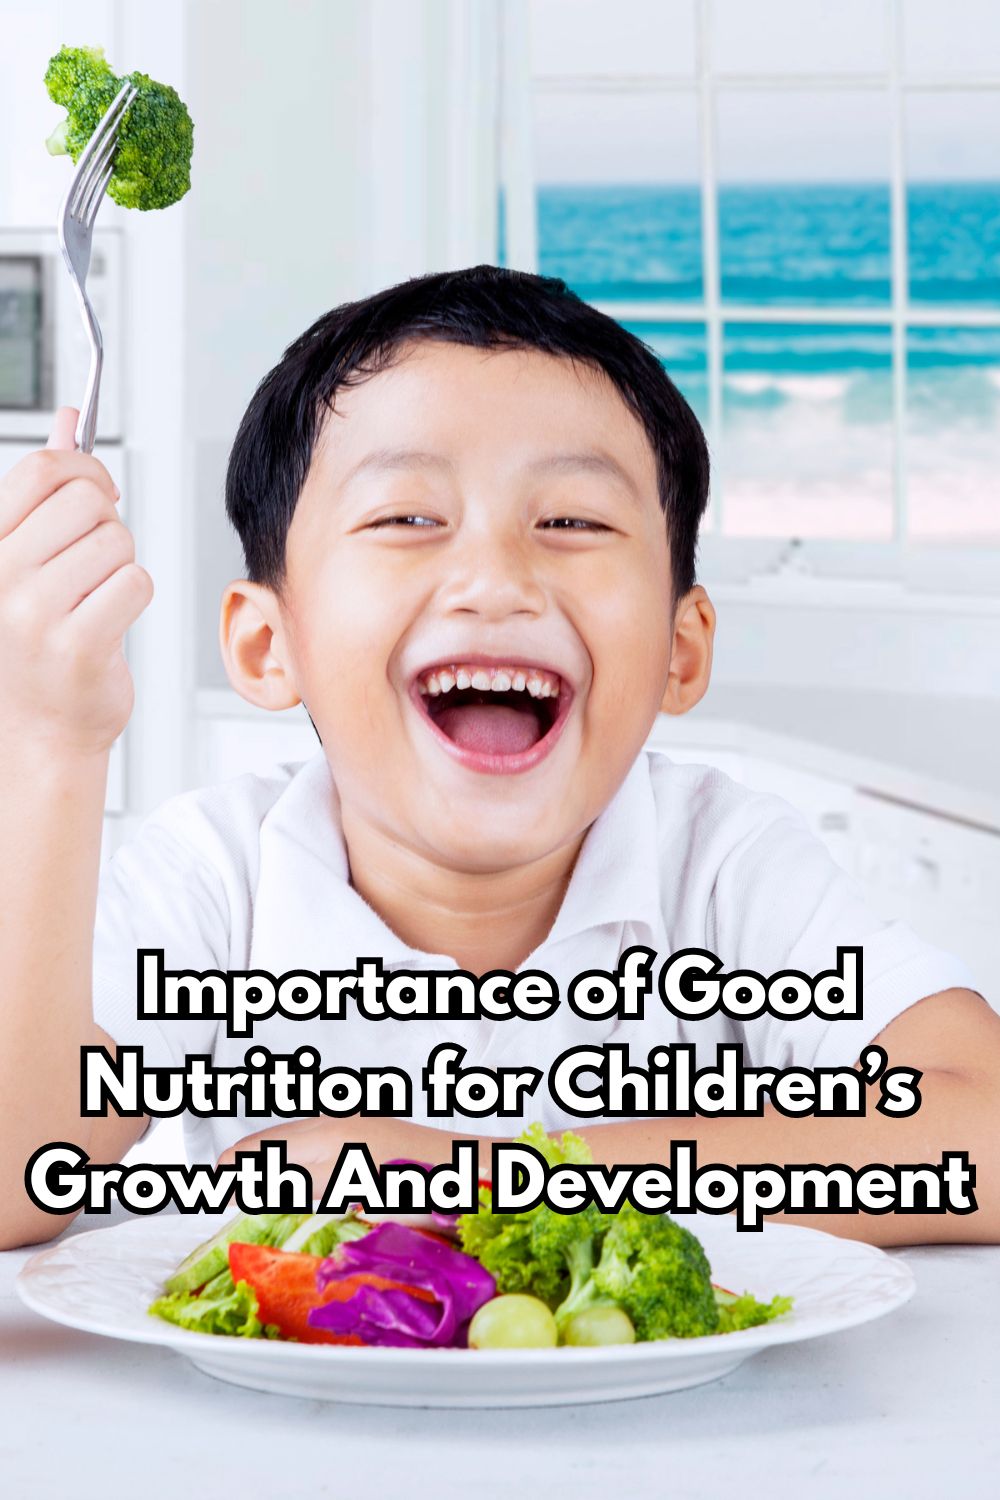 Importance of Good Nutrition for Children’s Growth And Development